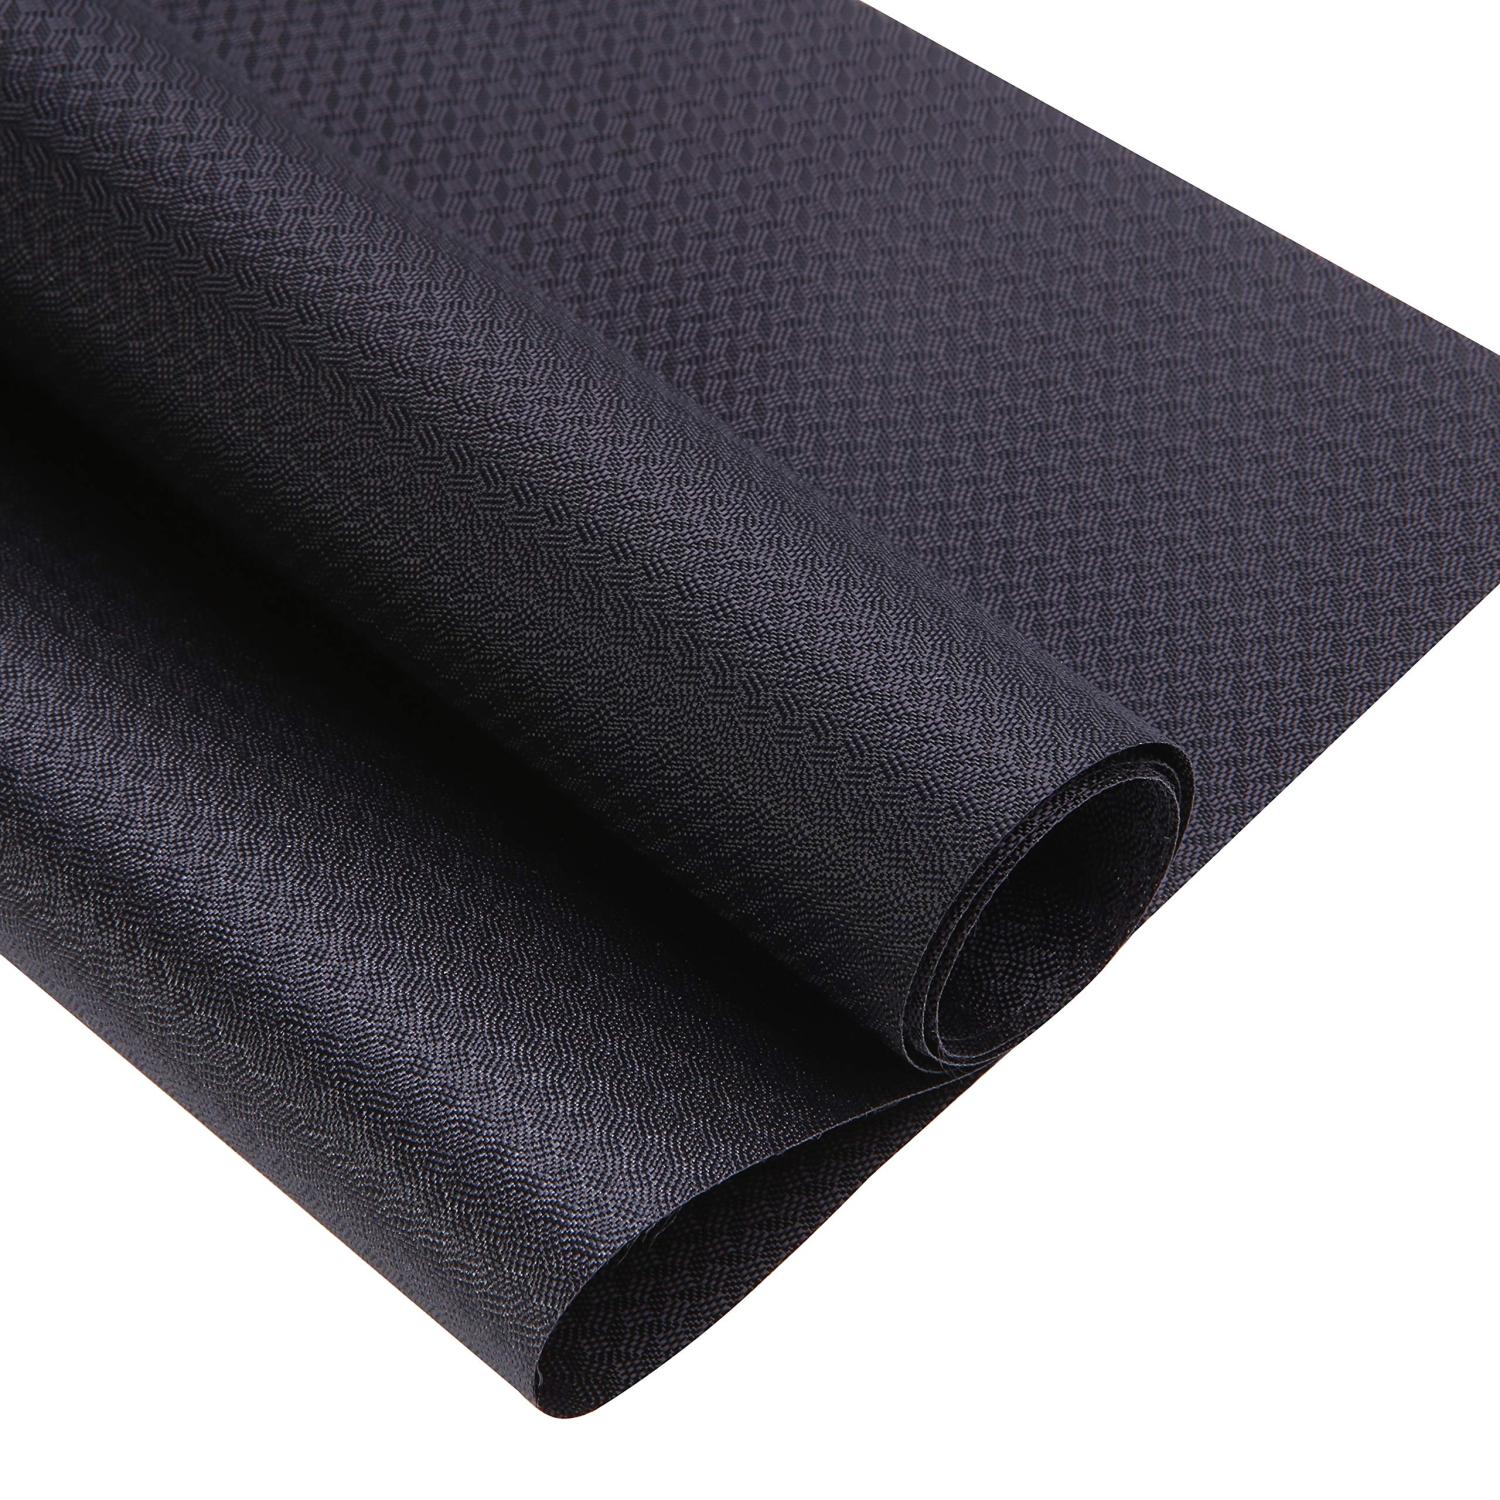 Outdoor Fabric Black 210 Denier Ripstop Nylon Fabric 60 Wide Waterproof  for Tent Water Repellent Dustproof Airtight Inflatable Curtains Tarp  Cover(2 Yard) Black 2 yard